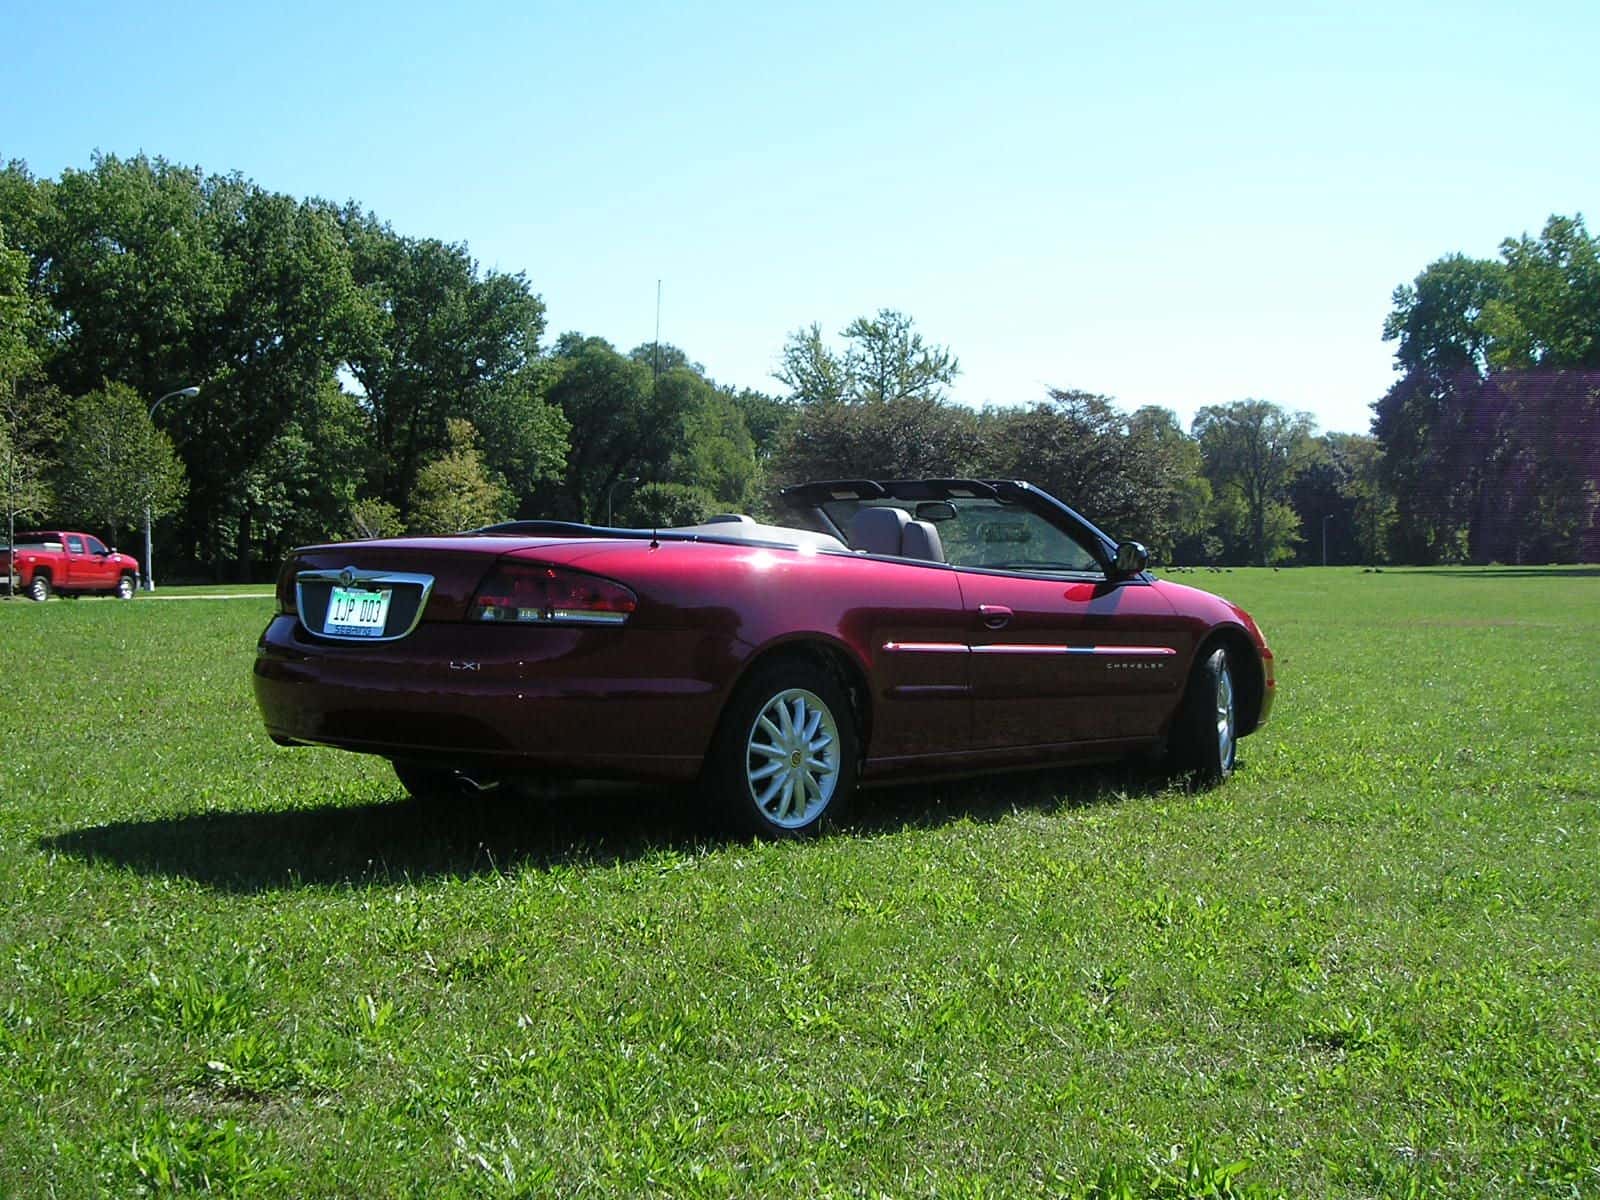 2001 Chrysler Sebring - 2001 Sebring LXi Convertible - Used - VIN 1C3EL55UX1N732490 - 108,500 Miles - 6 cyl - 2WD - Automatic - Convertible - Red - Grosse Pointe Park, MI 48230, United States